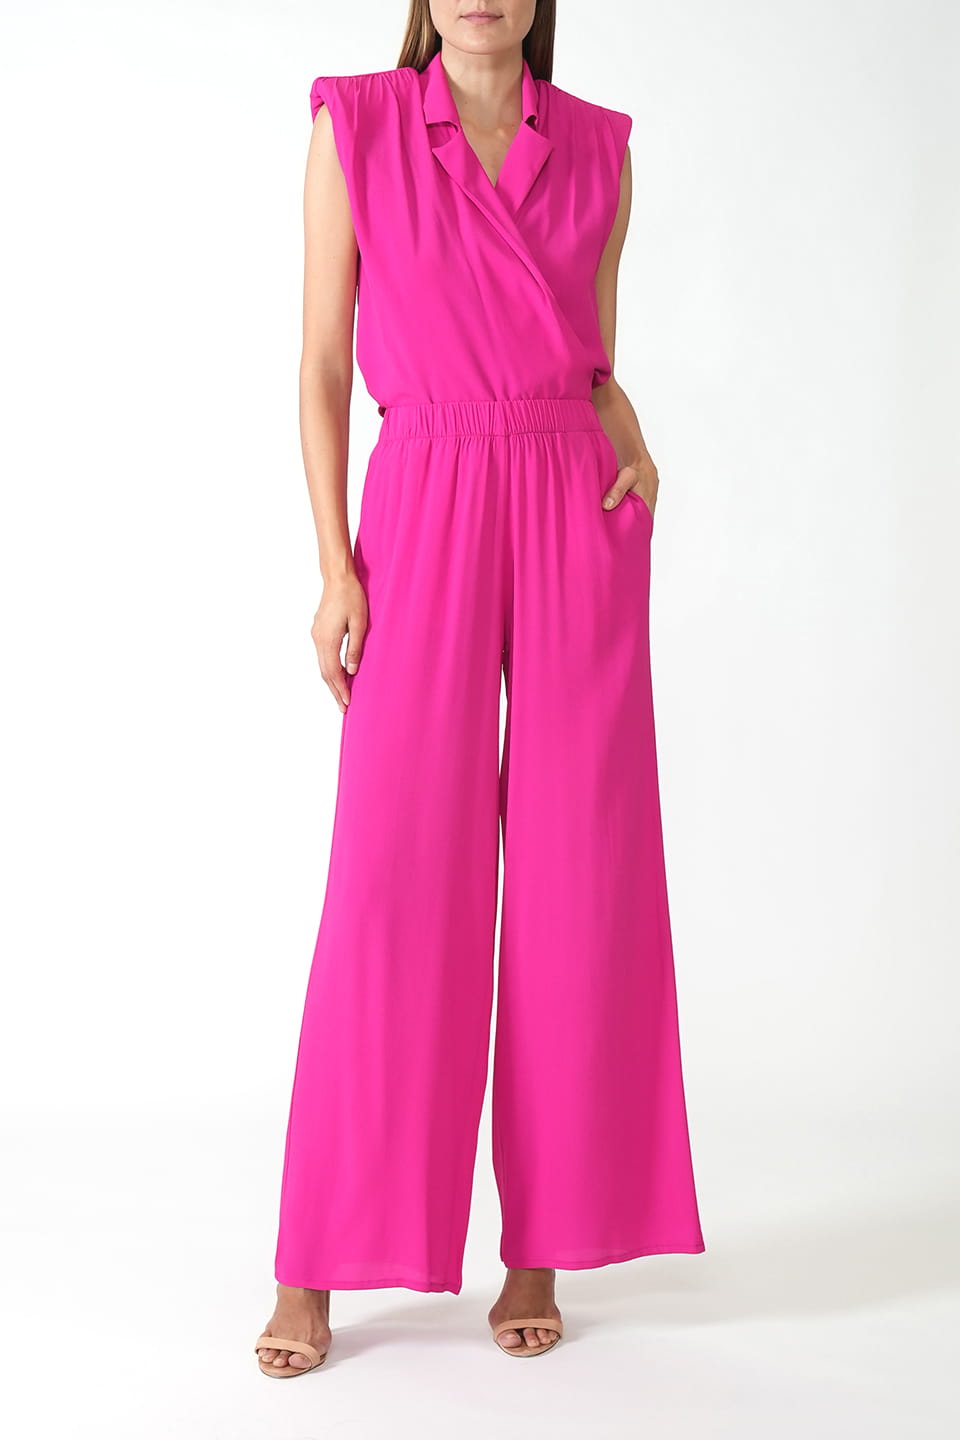 Designer Pink Women pants, shop online with free delivery in UAE. Product gallery 2